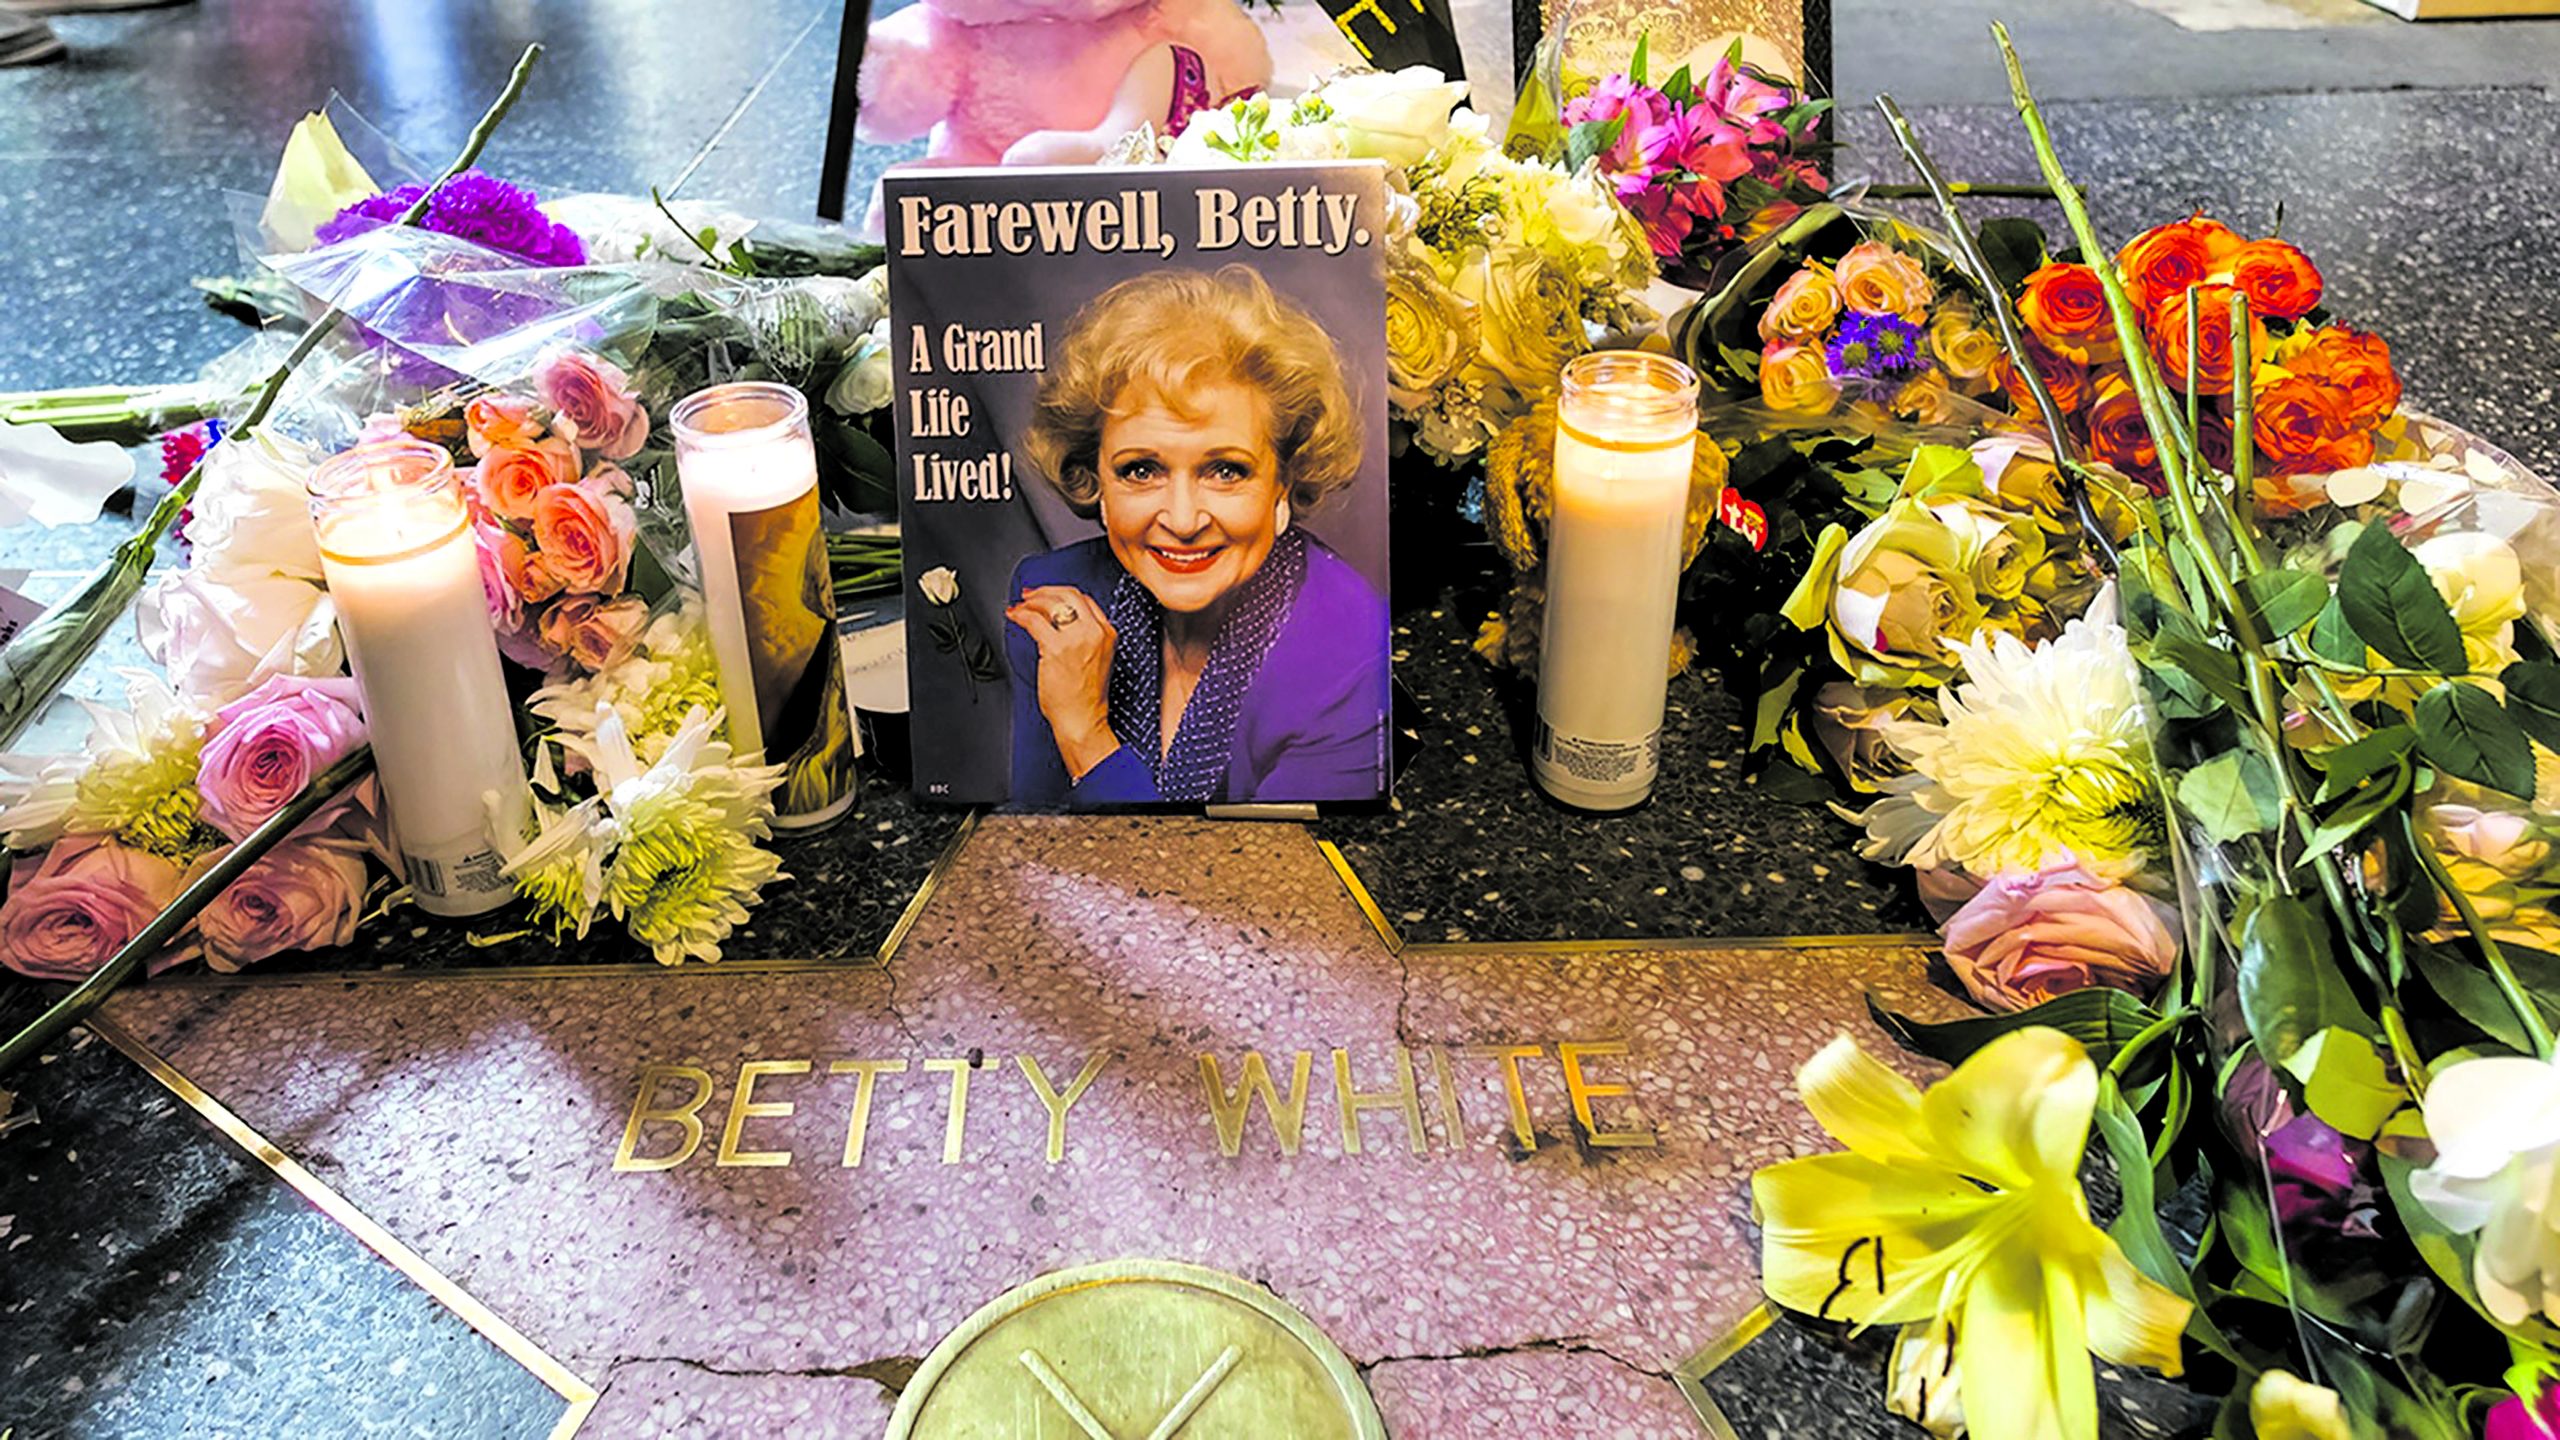 She is perhaps most adored for playing Rose Nylund on The Golden Girls, an American sitcom about four women ‘of a certain age,’ which broke with convention. When the show began, Betty was aged 63 when she played 55-year-old Rose so was actually a year older than Estelle Getty, who played elderly, feisty Sophia.